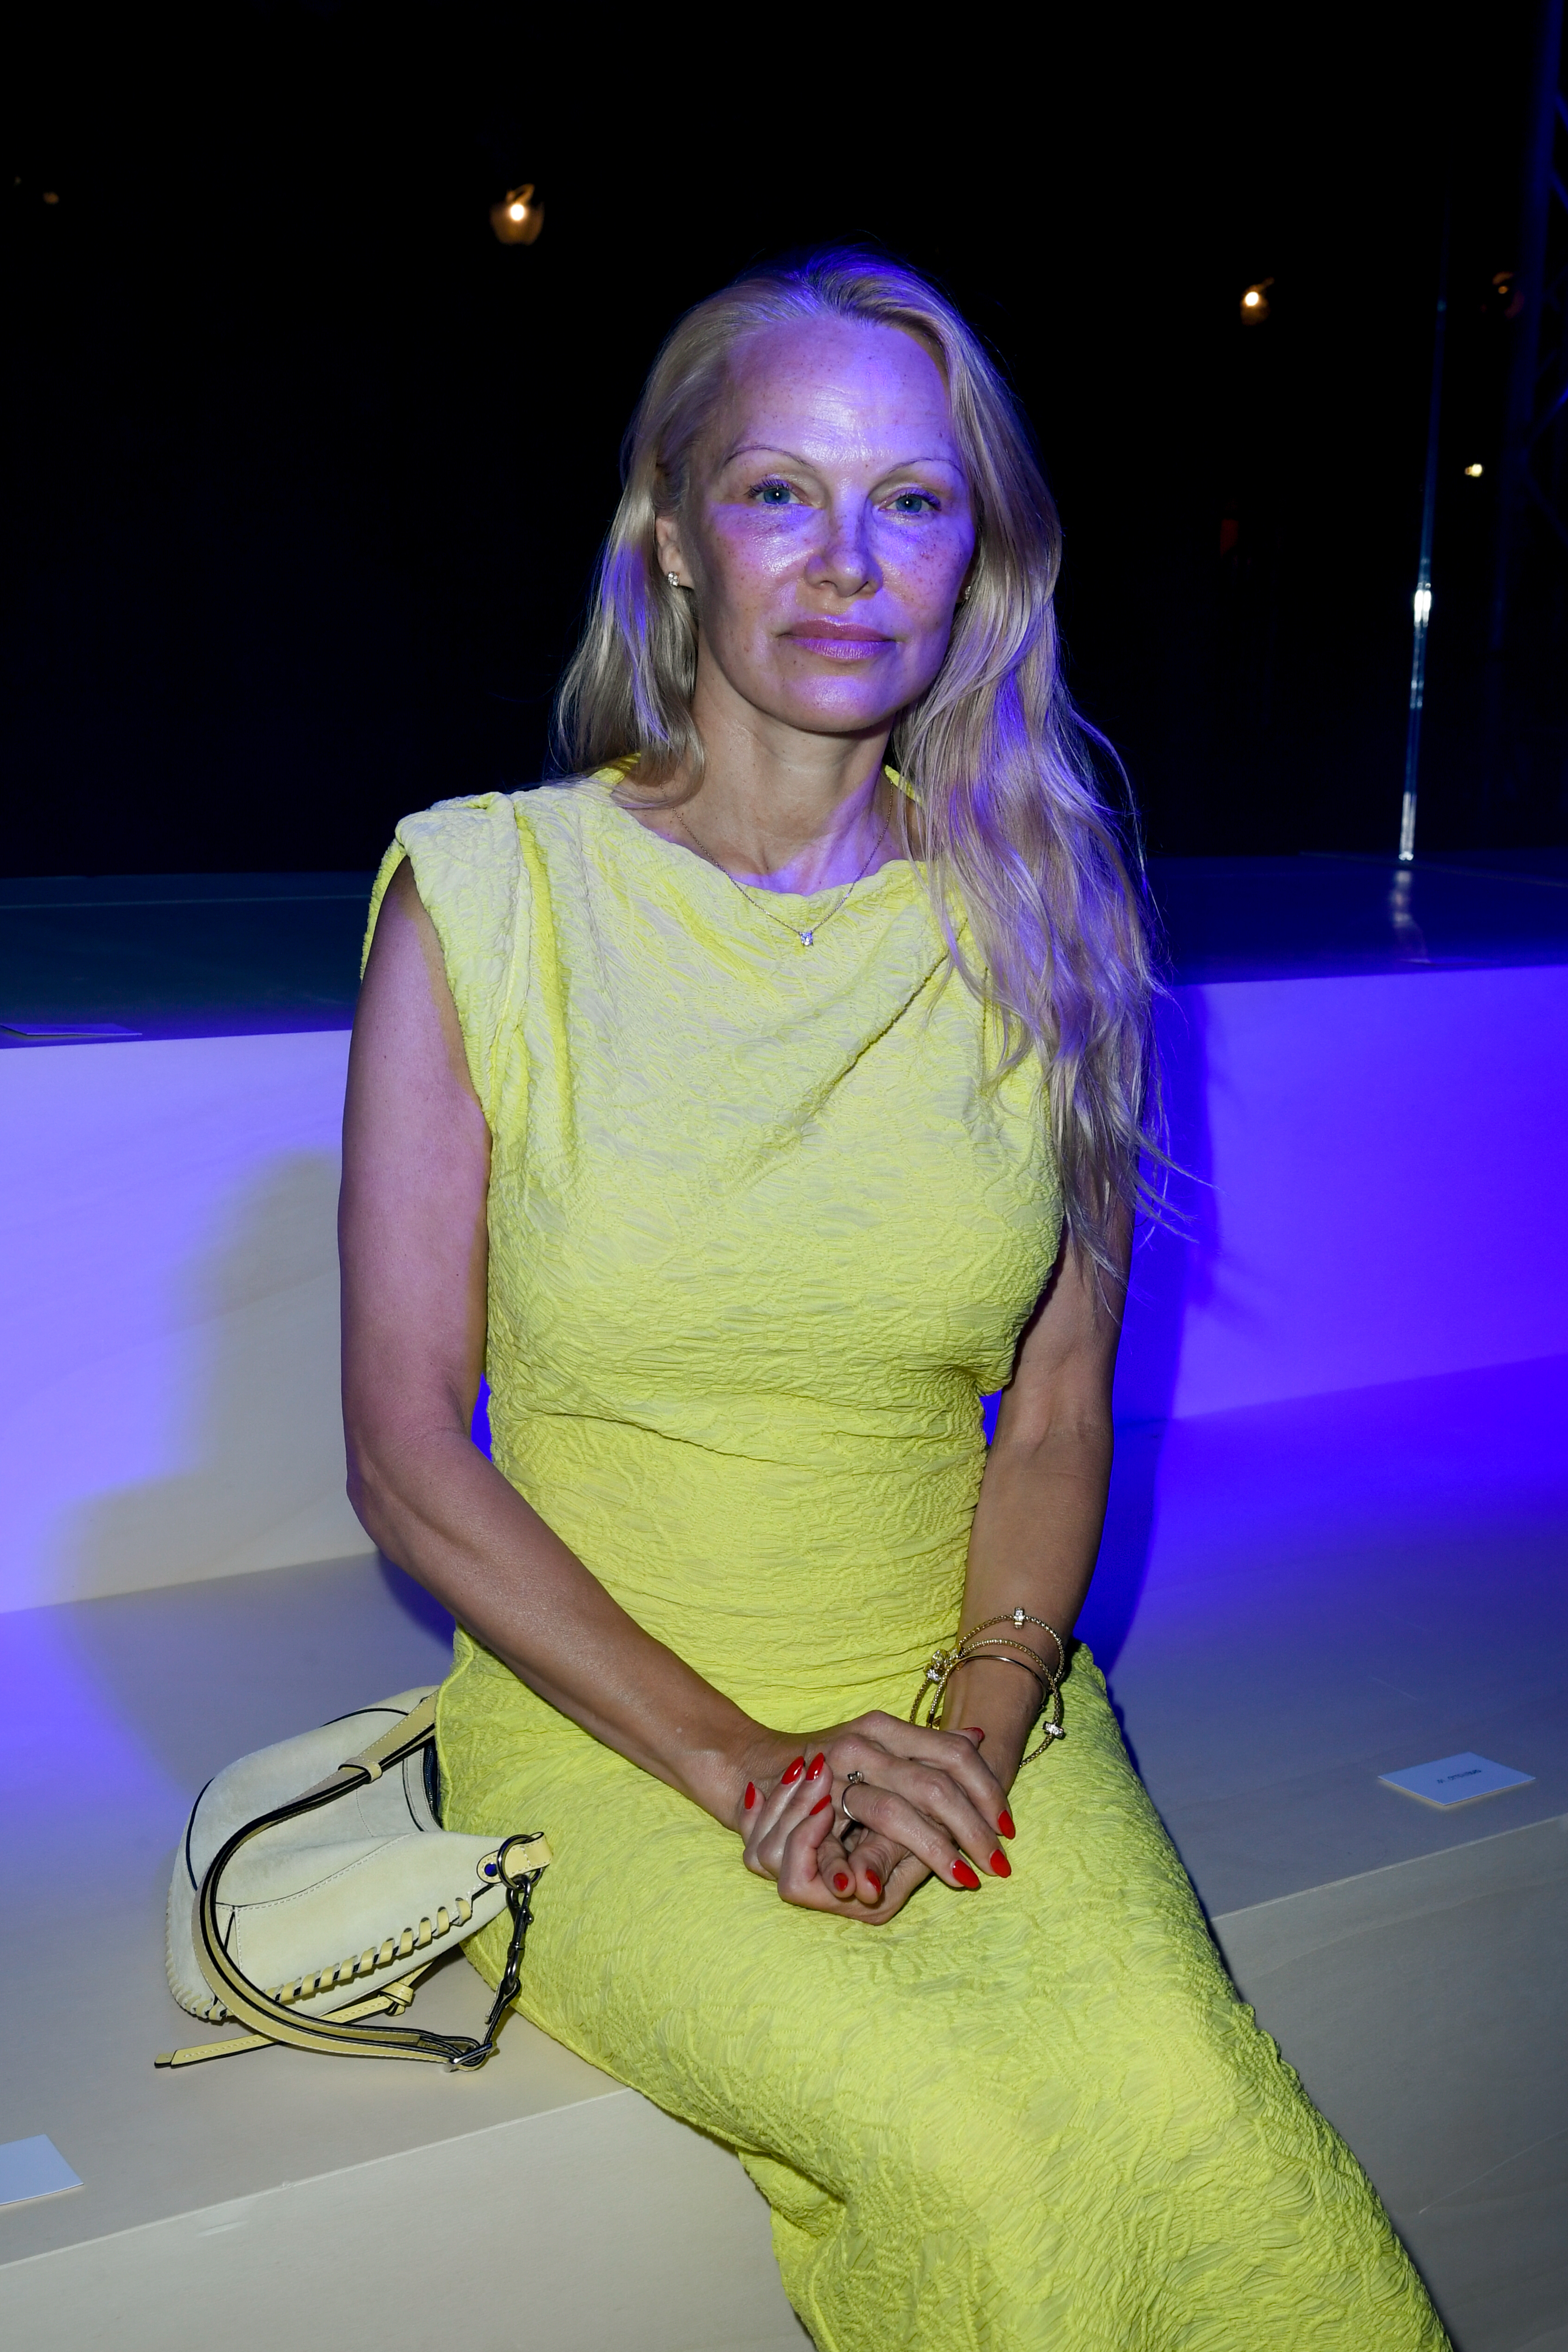 Pamela Anderson sitting at an event